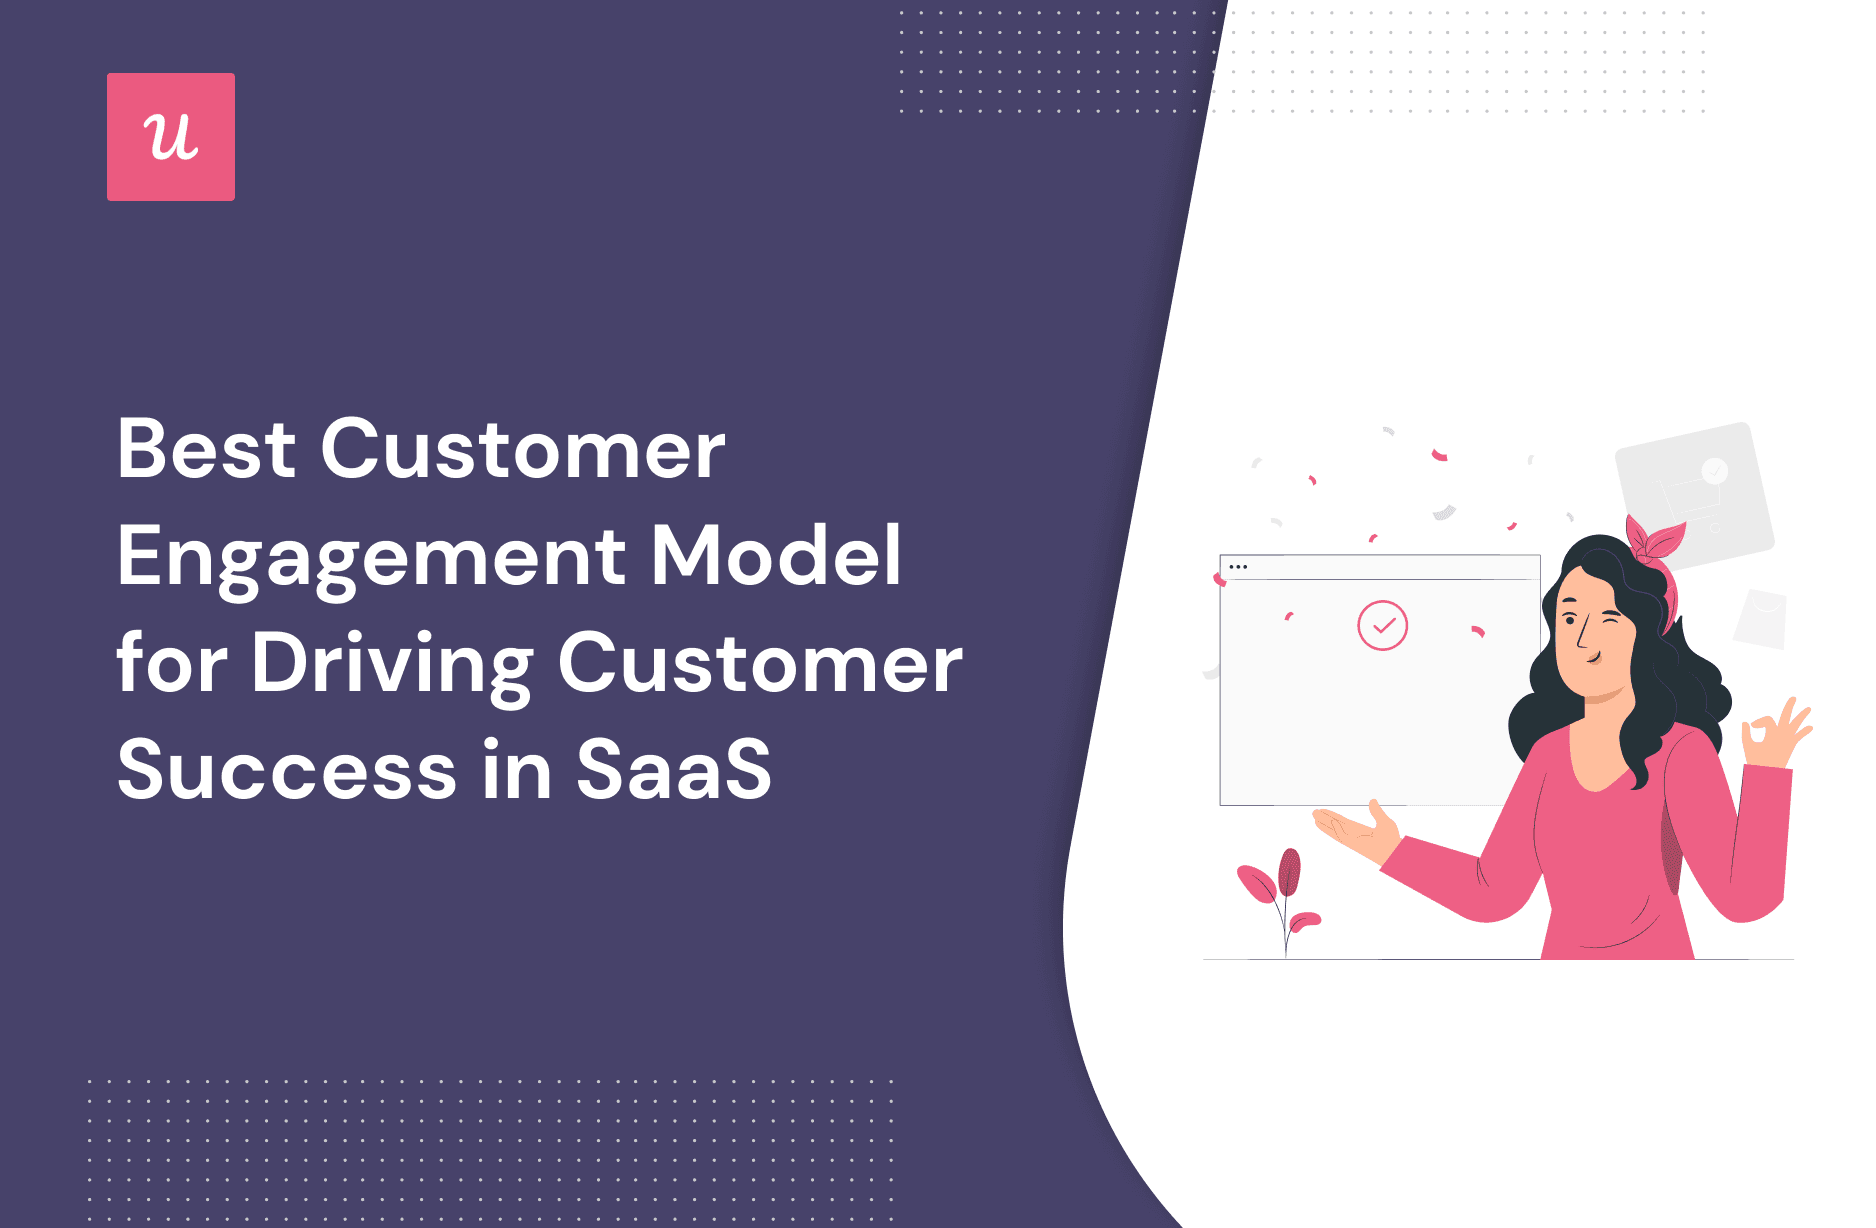 Best Customer Engagement Model For Driving Customer Success in SaaS